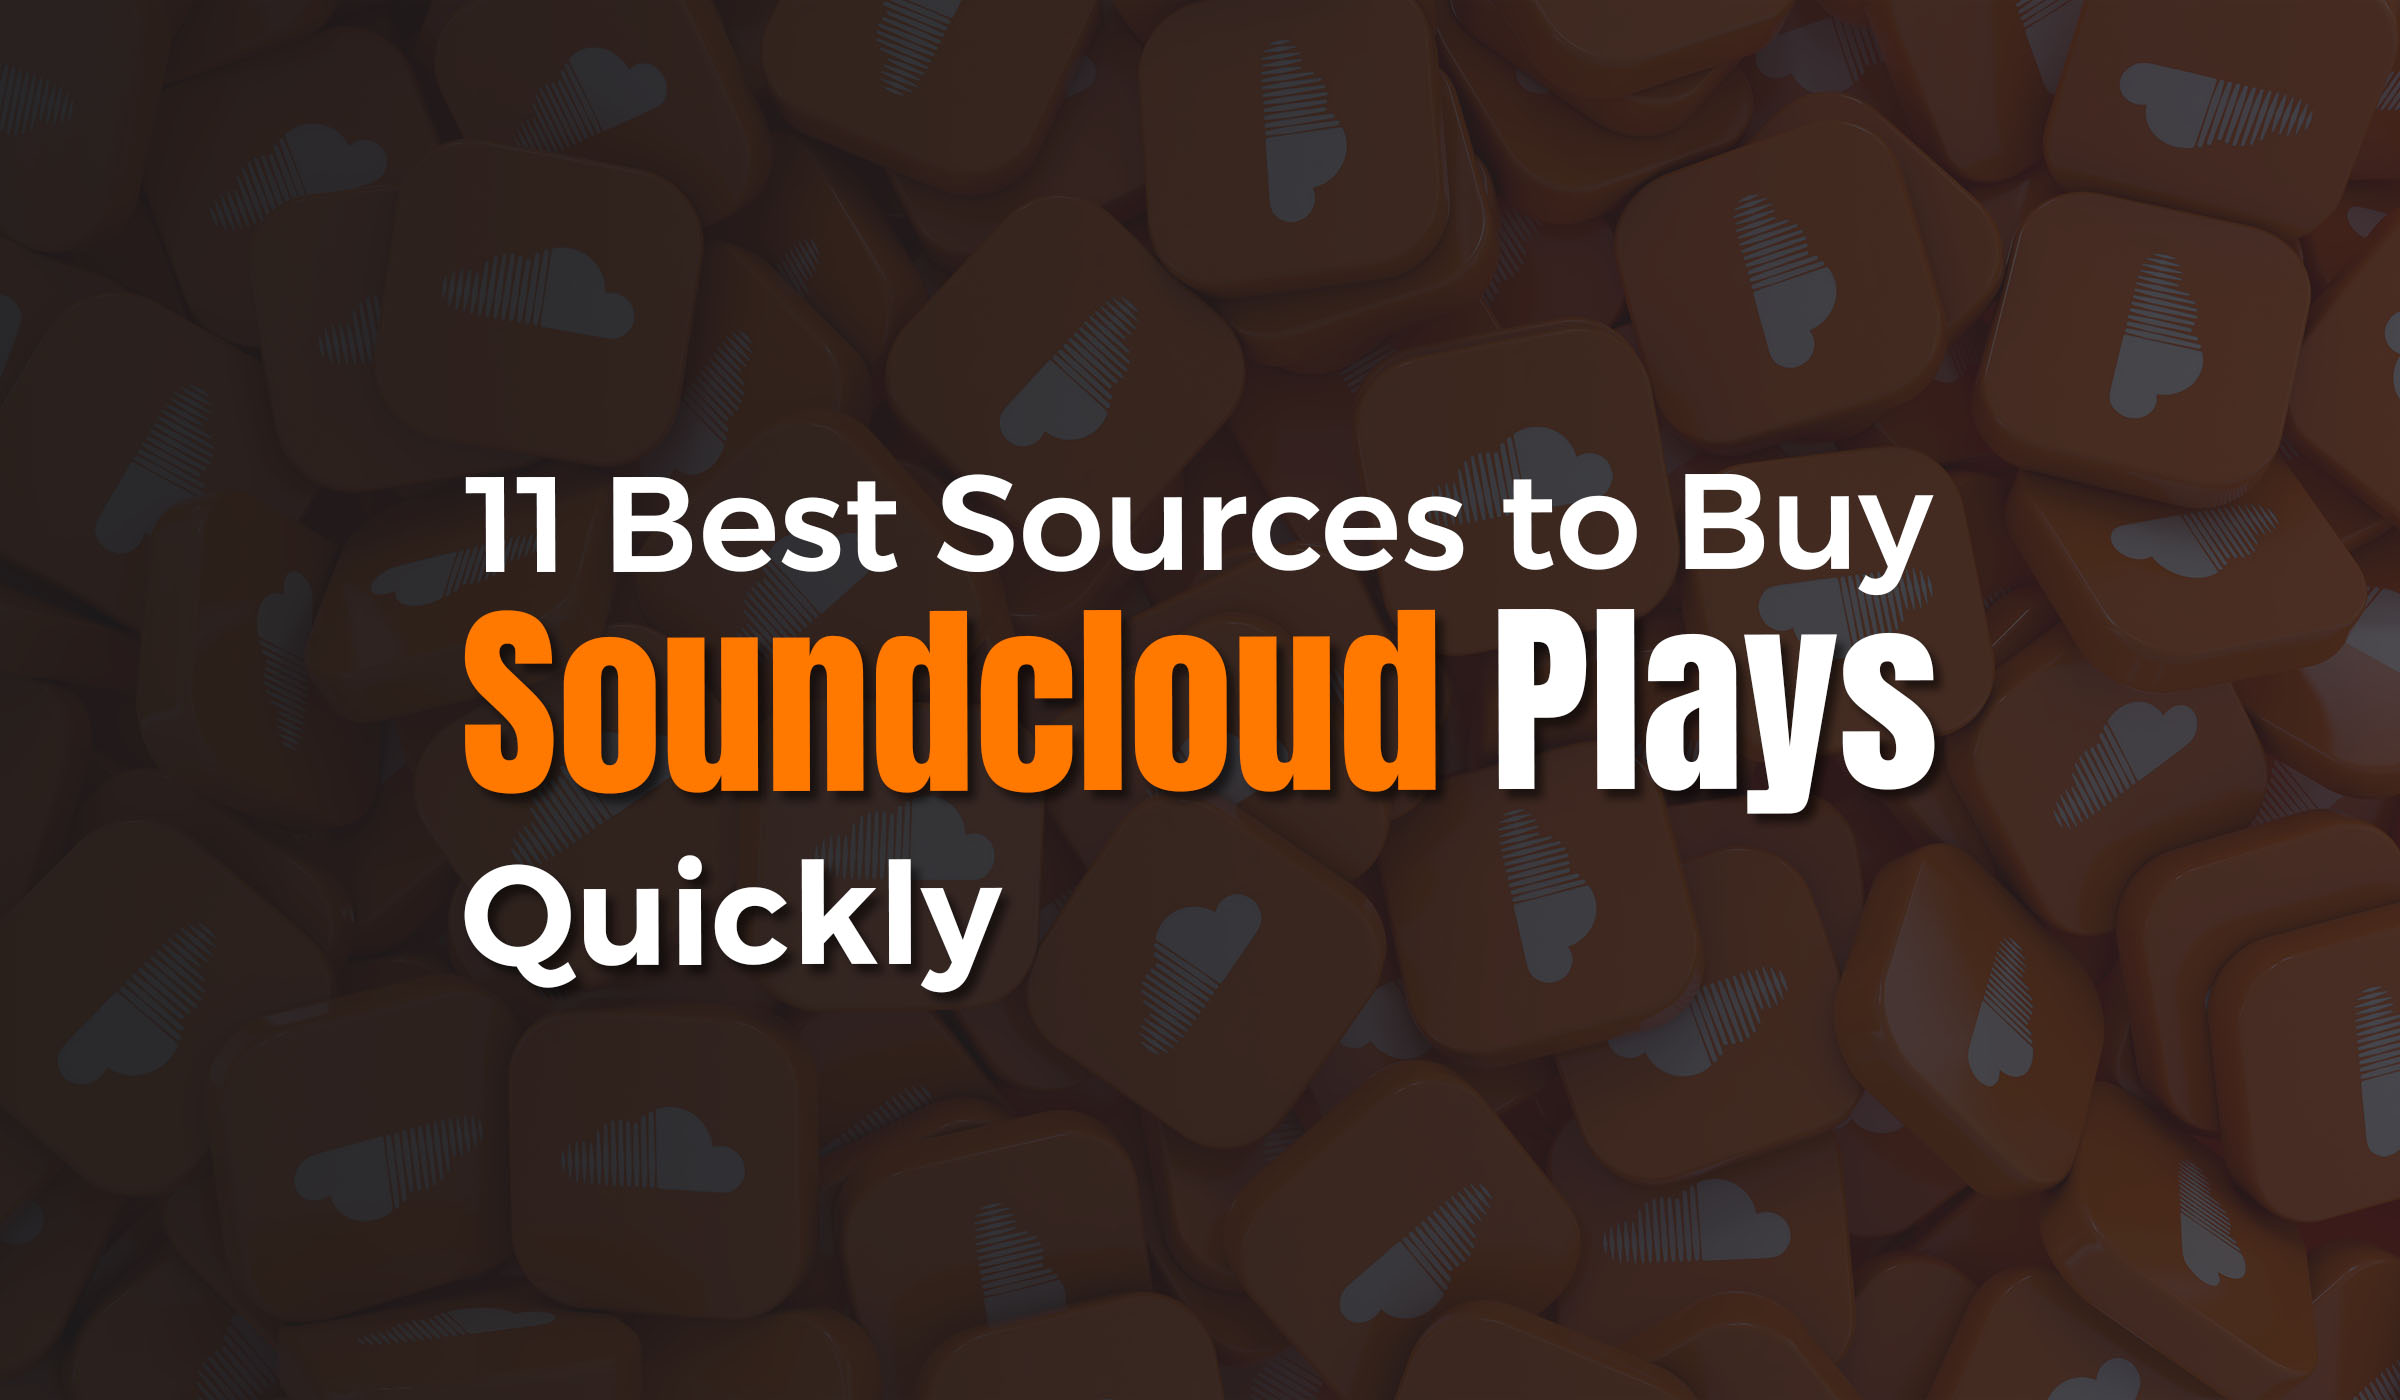 Buy Soundcloud Plays Quickly